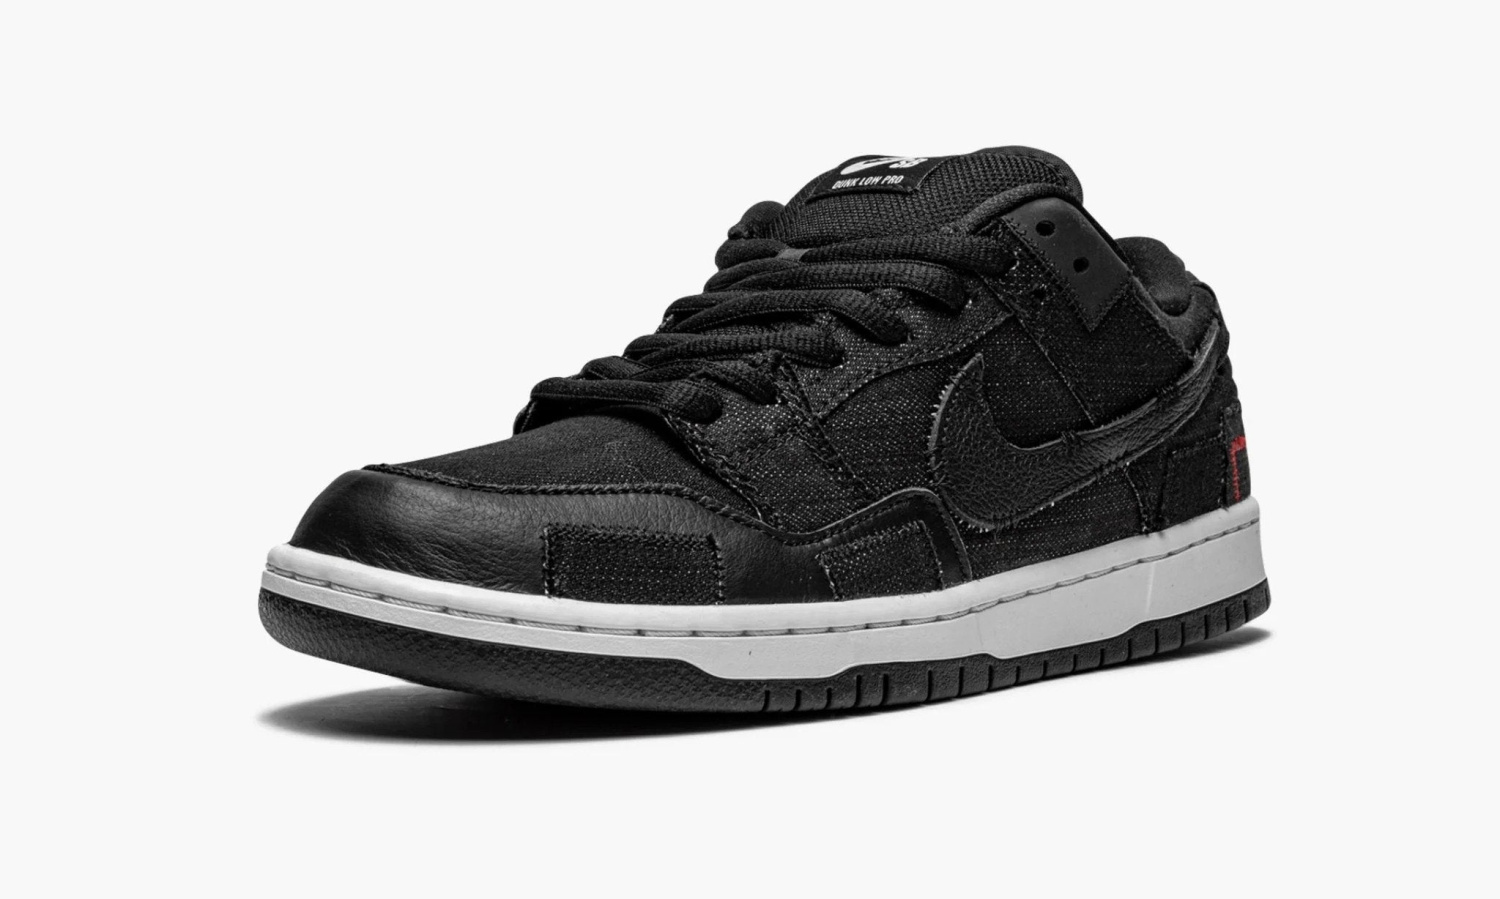 фото Dunk Low SB "Wasted Youth" (Nike Dunk Low)-DD8386 001